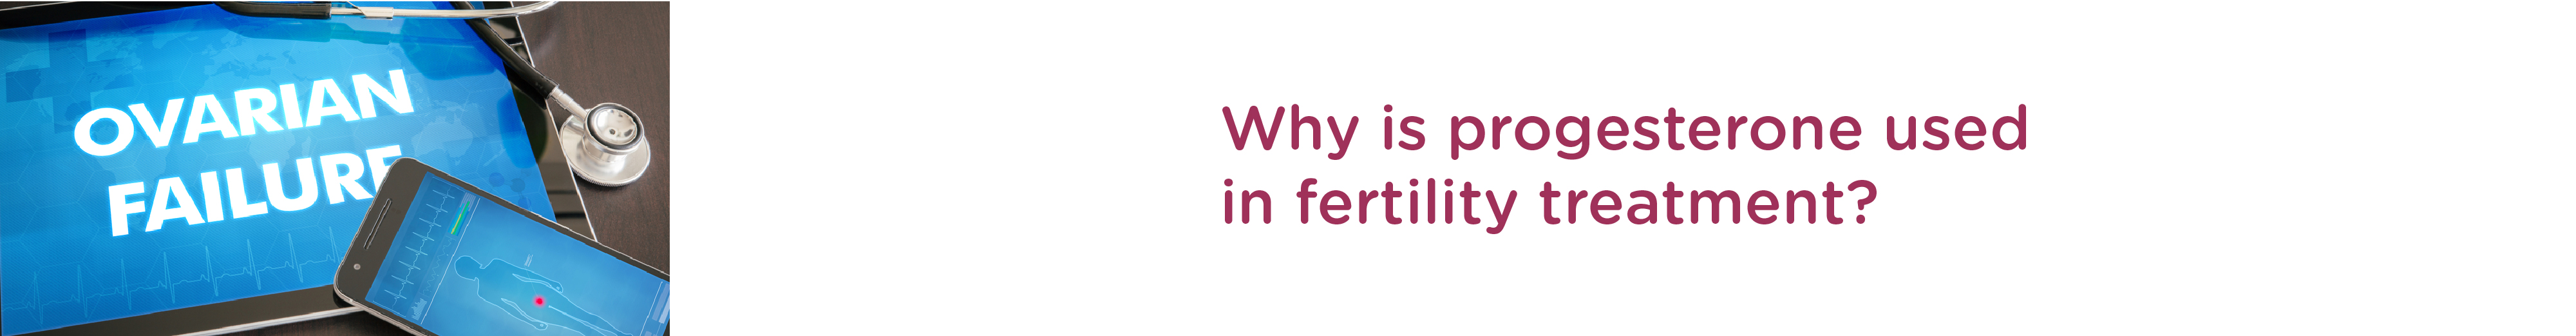 Why is progesterone used in fertility treatment?